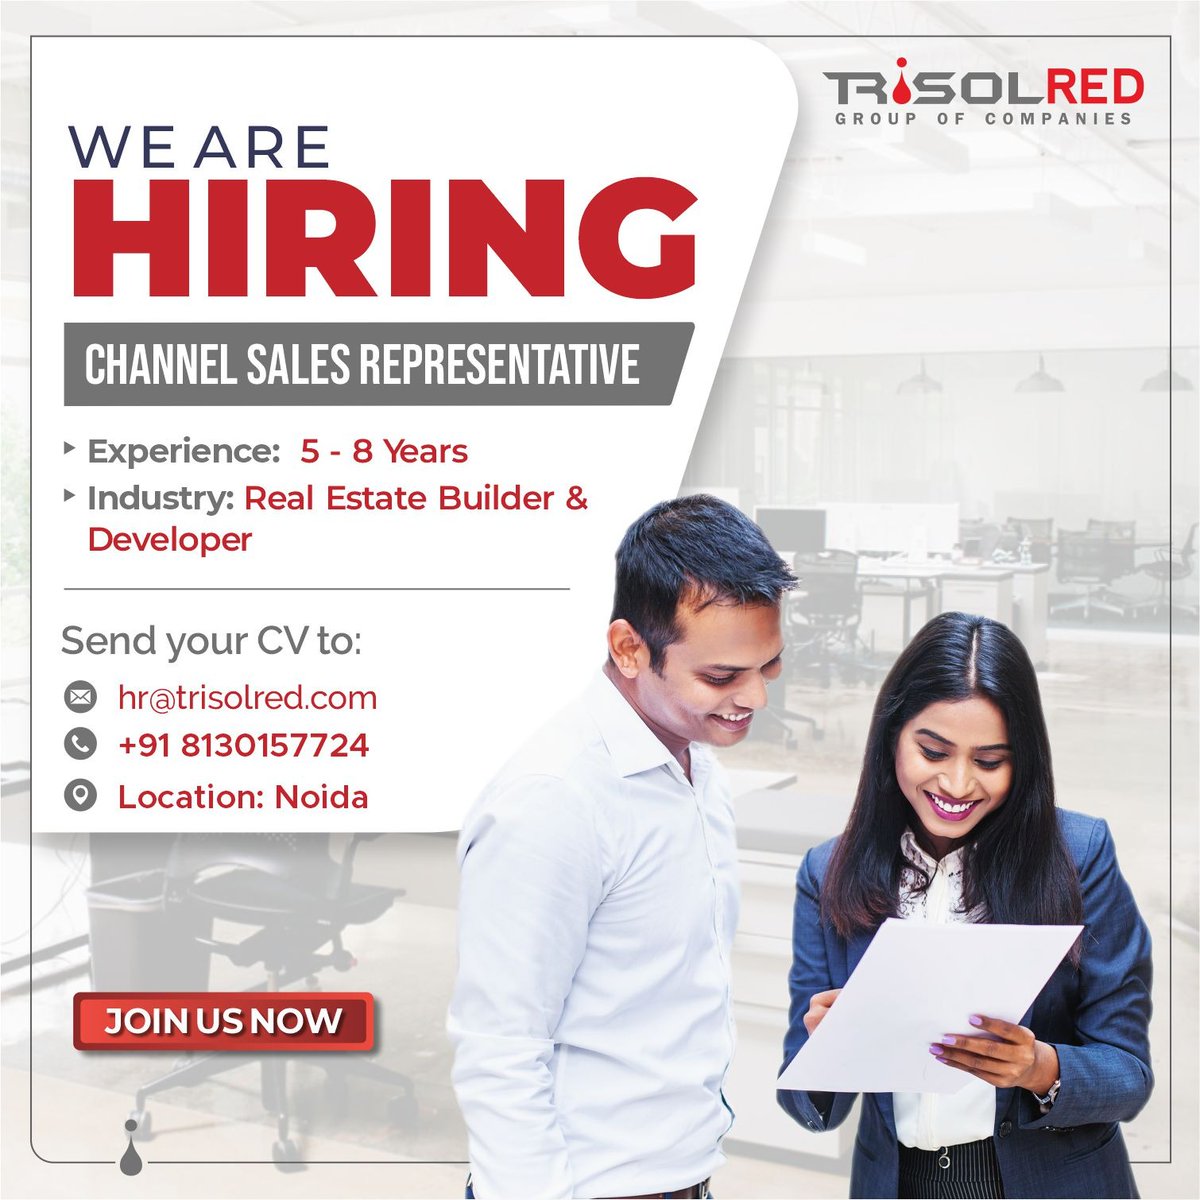 We are hiring! 🌟 
Looking for a talented Channel Sales Representative with 5-8 years of experience. Join our dynamic team! 

Send your CV to hr@trisolred.com or contact us at 8130157724. 📧📞

#TrisolRED #Trisol #JobOpportunity #HiringNow #SalesRepresentative #JoinOurTeam